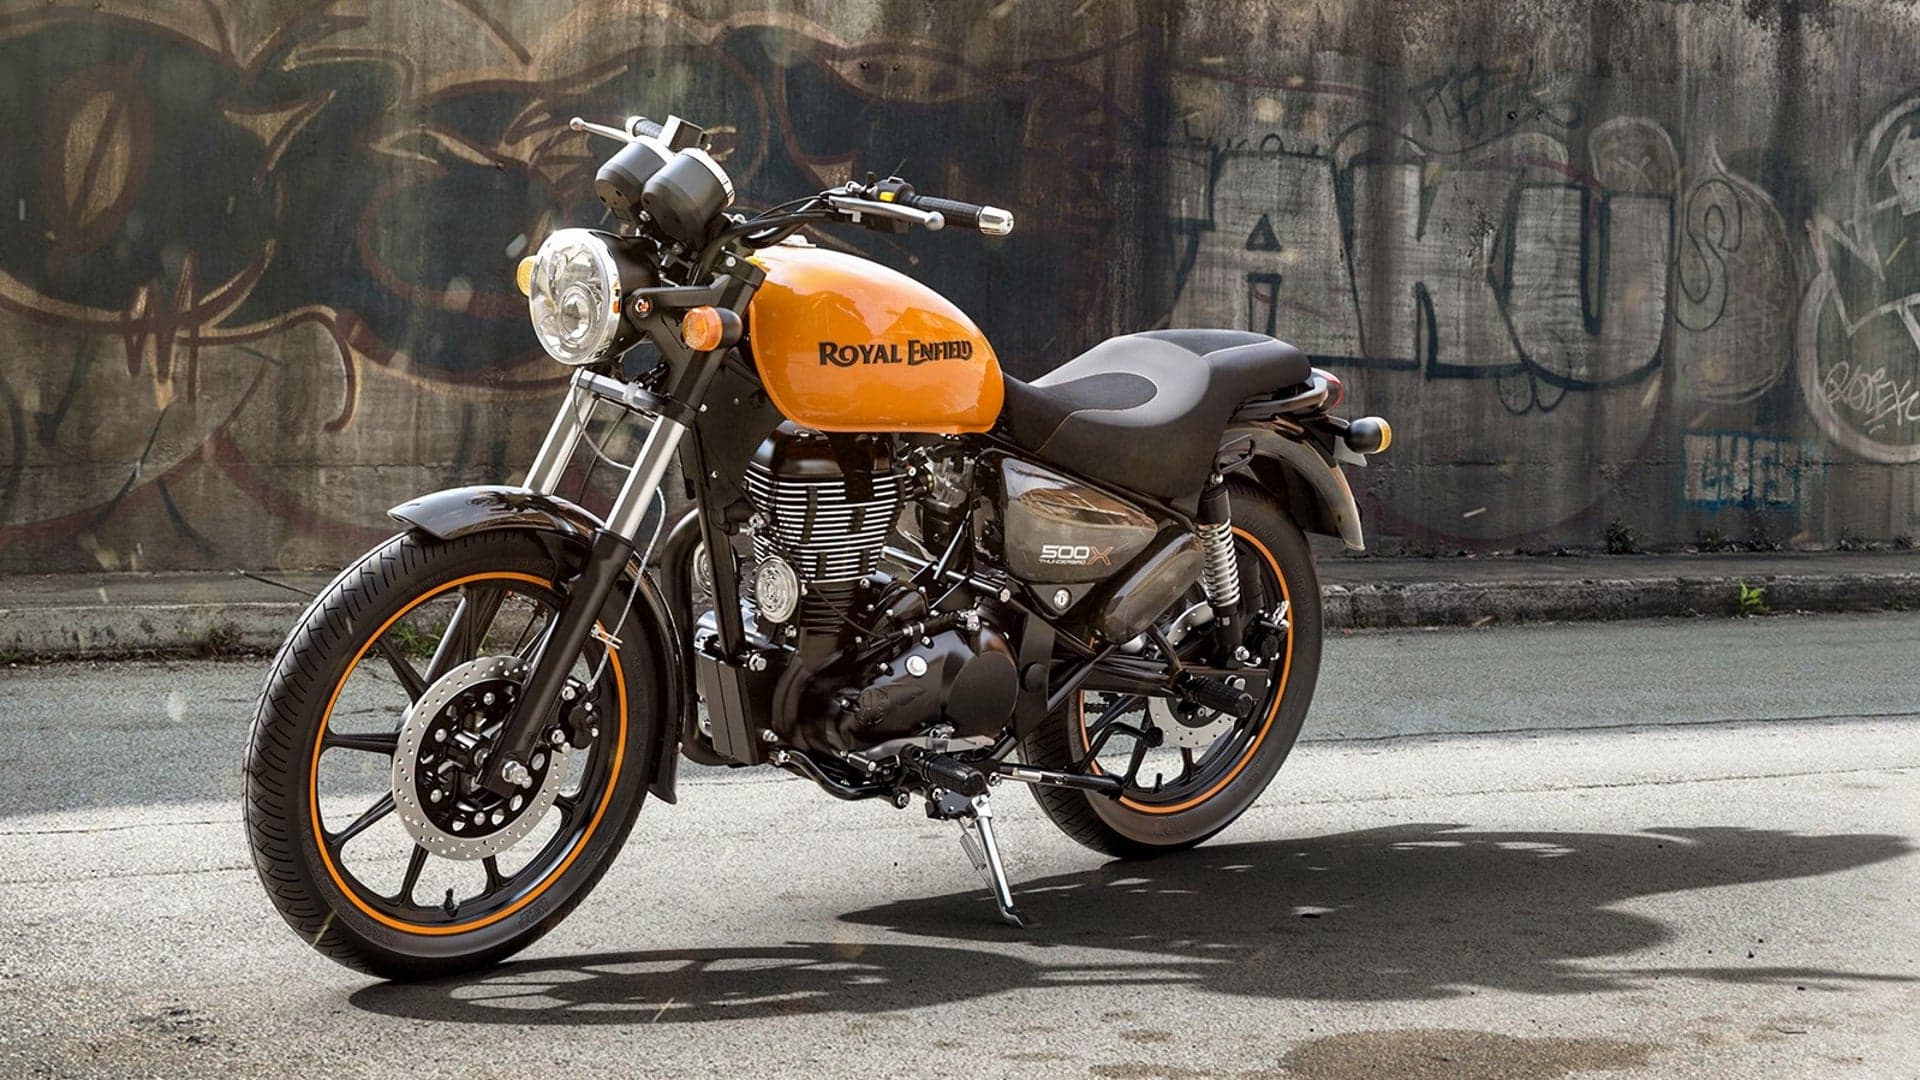 The New Royal Enfield Thunderbird X is Another Beautiful Bike We Can’t Have in the U.S.